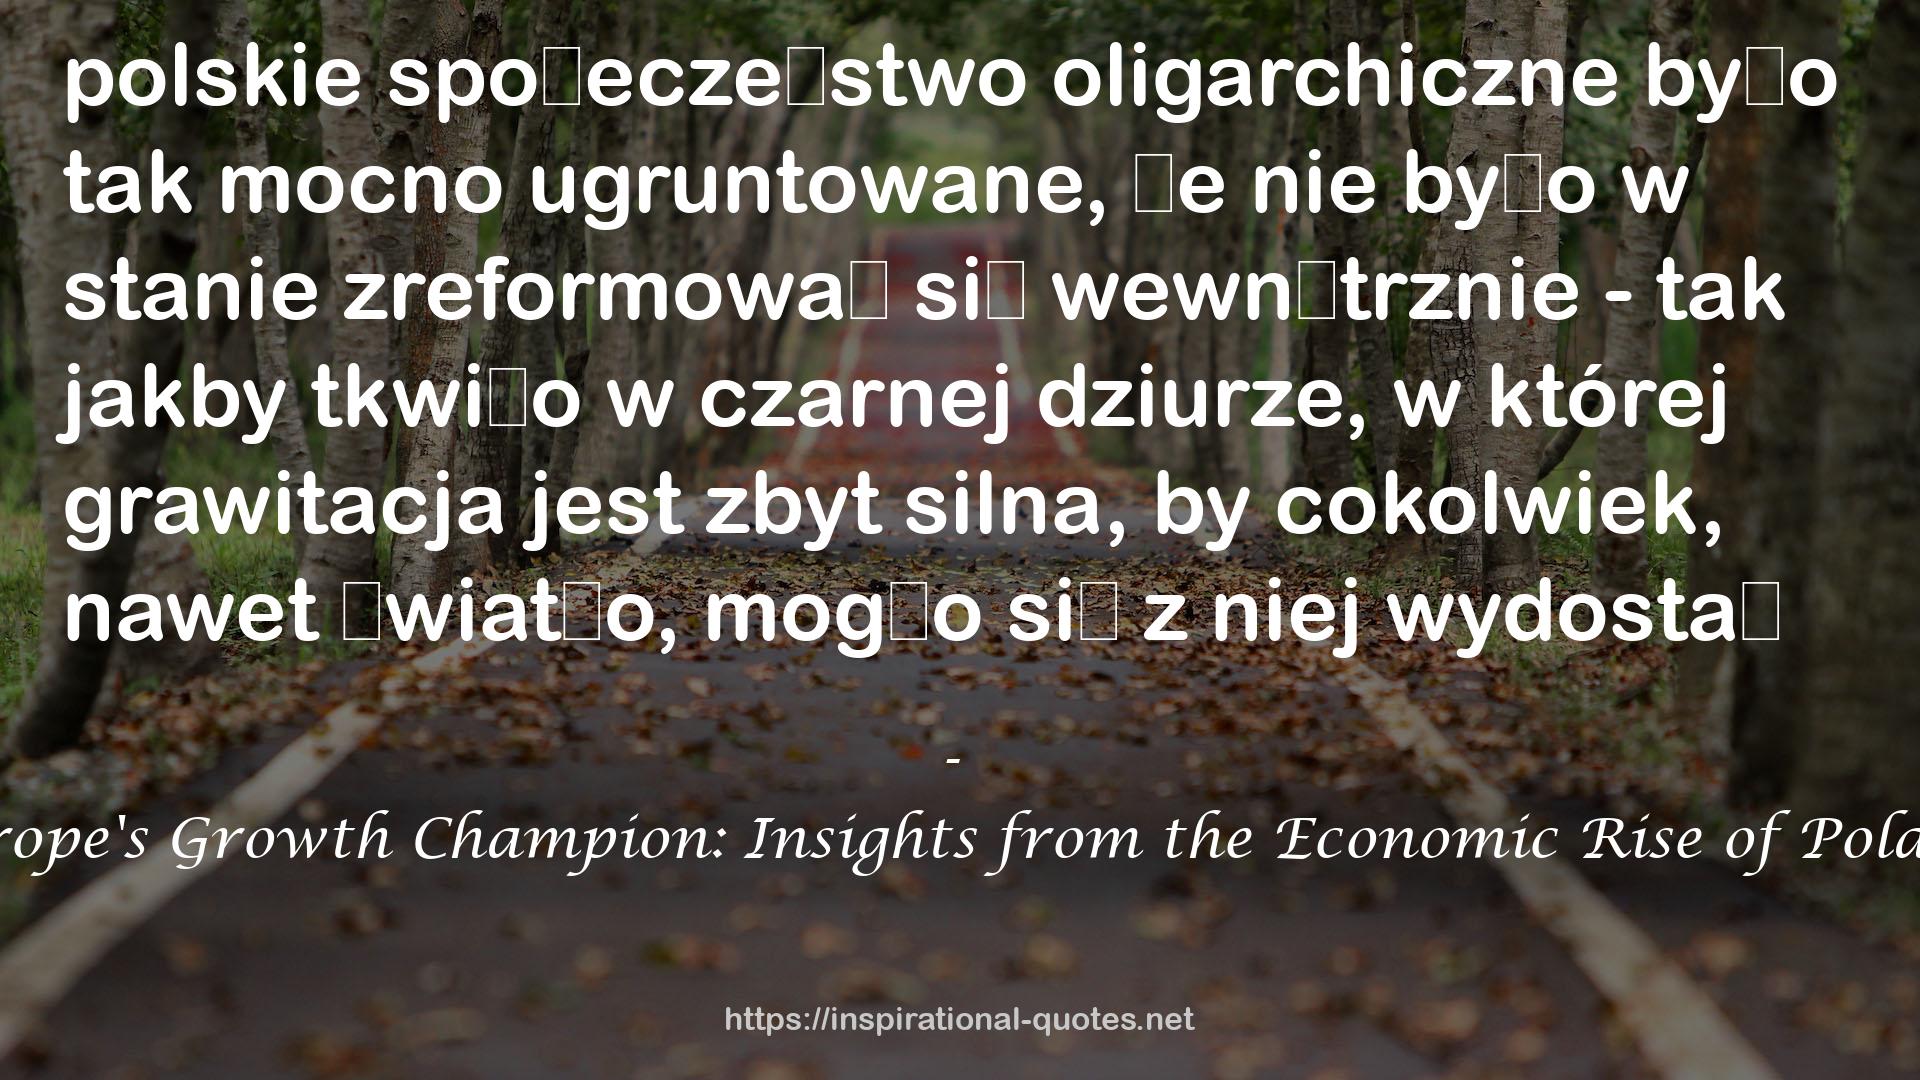 Europe's Growth Champion: Insights from the Economic Rise of Poland QUOTES